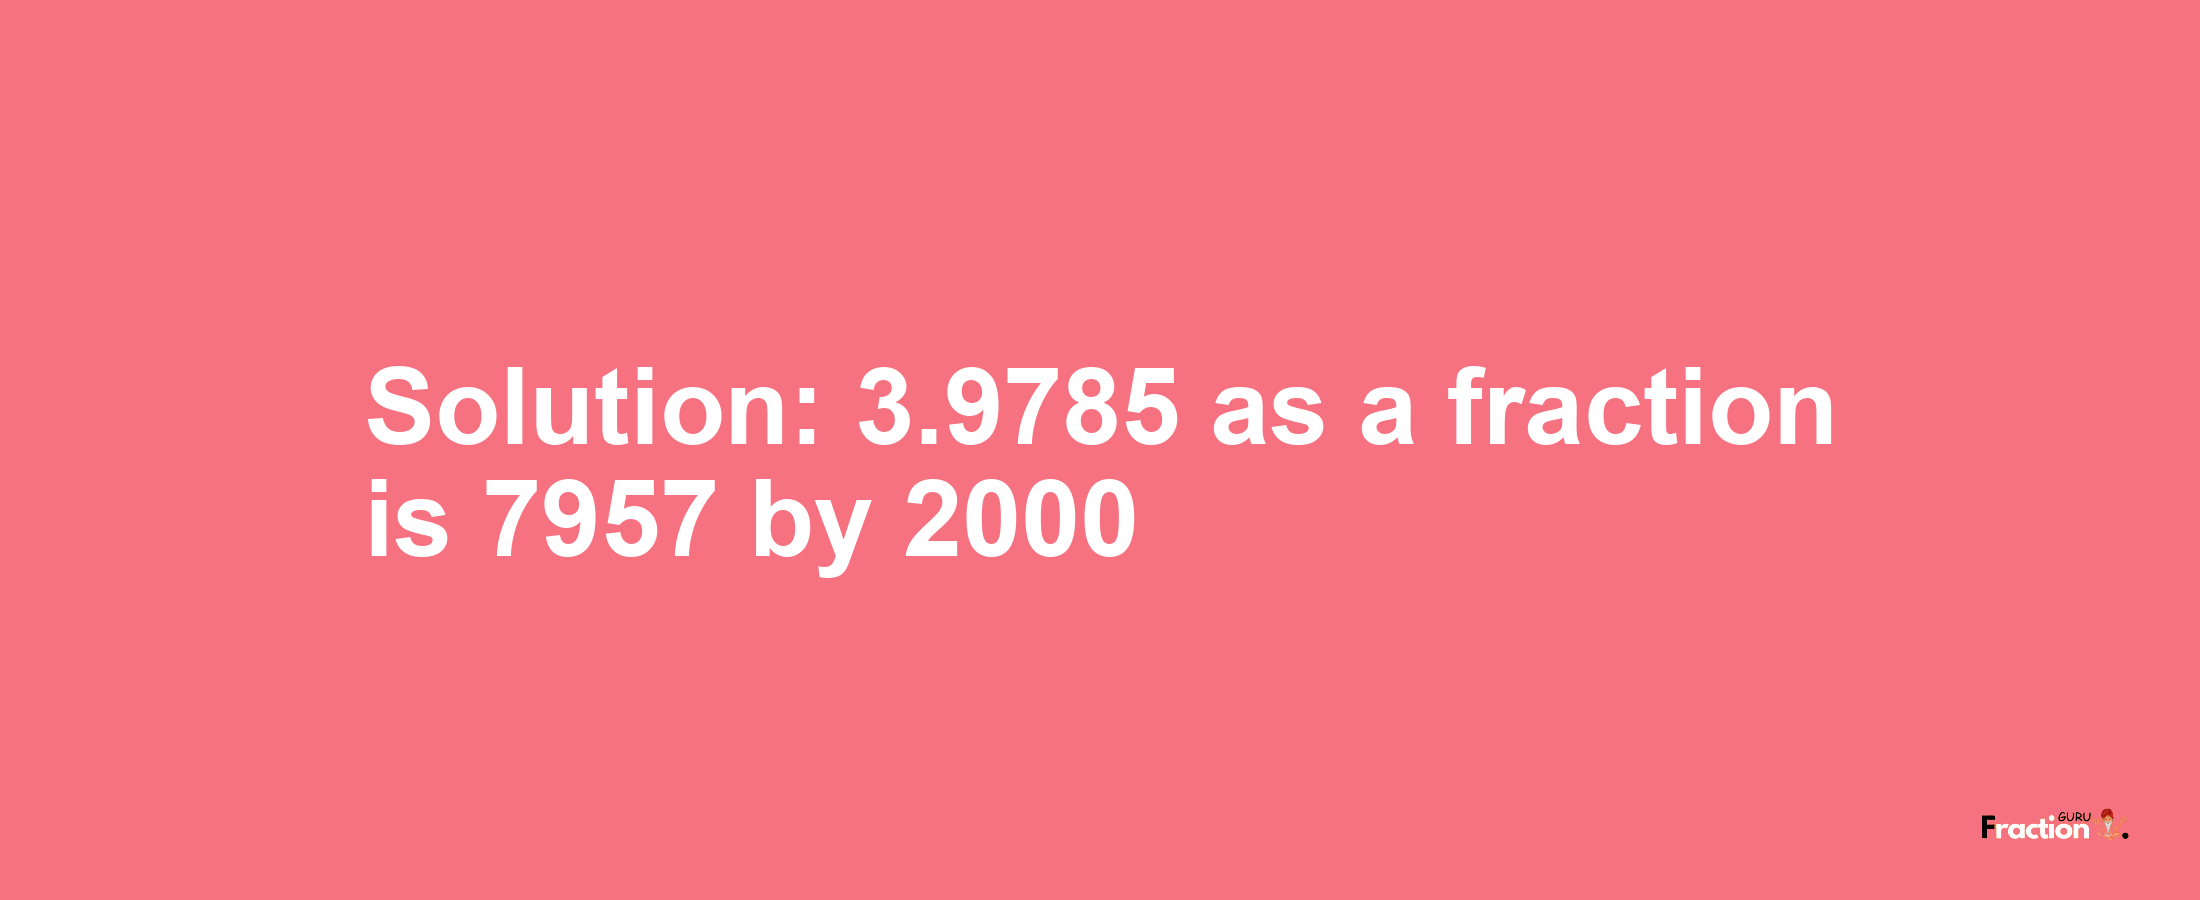 Solution:3.9785 as a fraction is 7957/2000